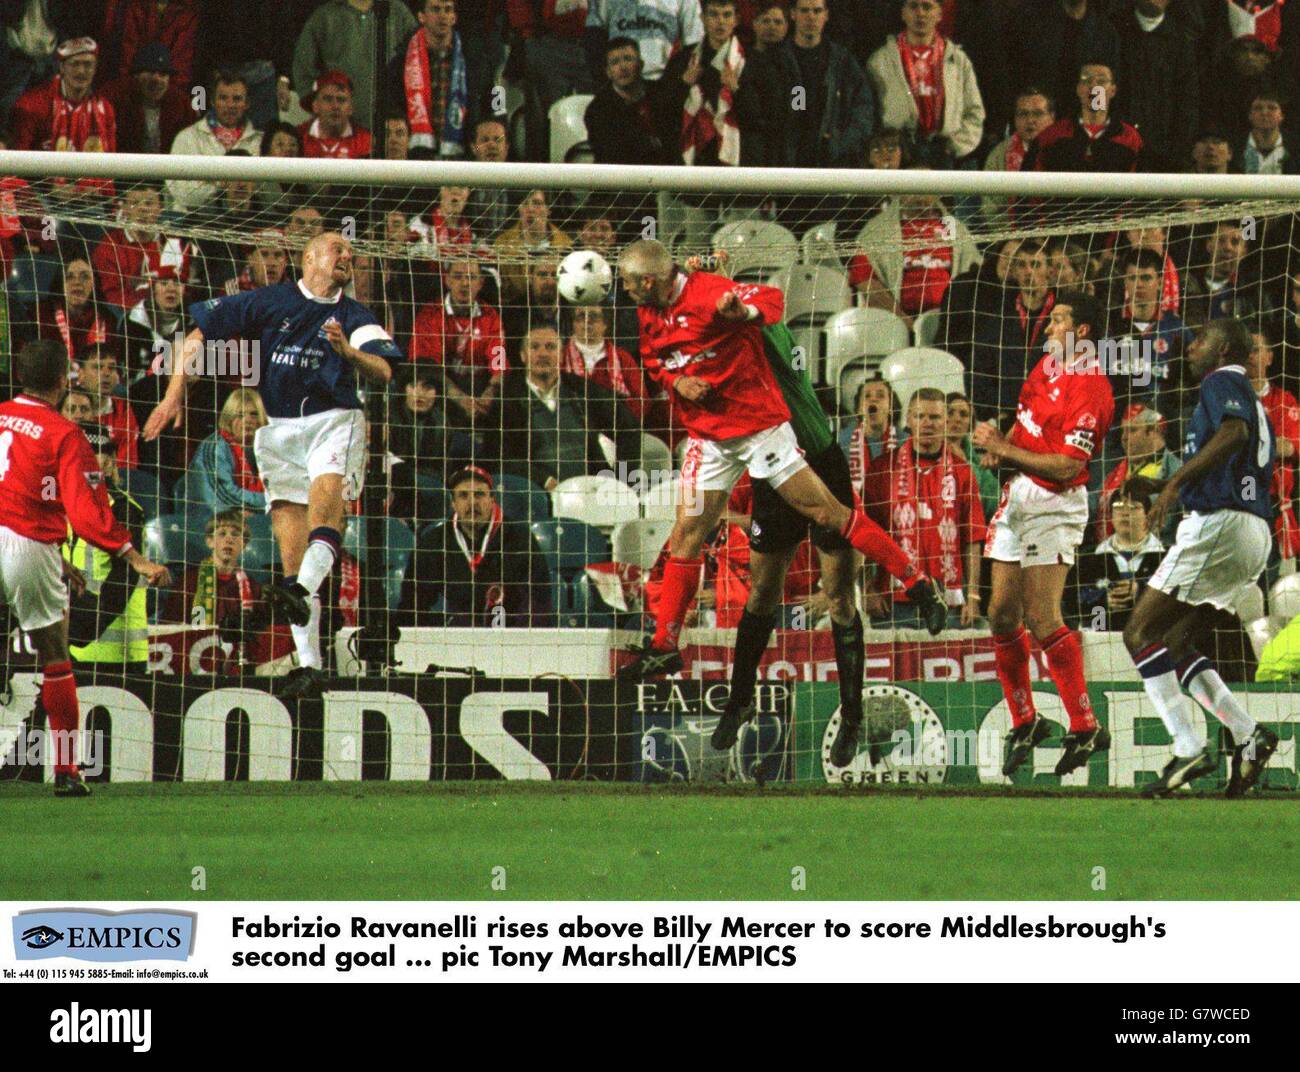 Soccer - FA Cup Semi-Final Replay - Chesterfield v Middlesbrough. Fabrizio Ravanelli rises above Billy Mercer to score Middlesbrough's second goal Stock Photo